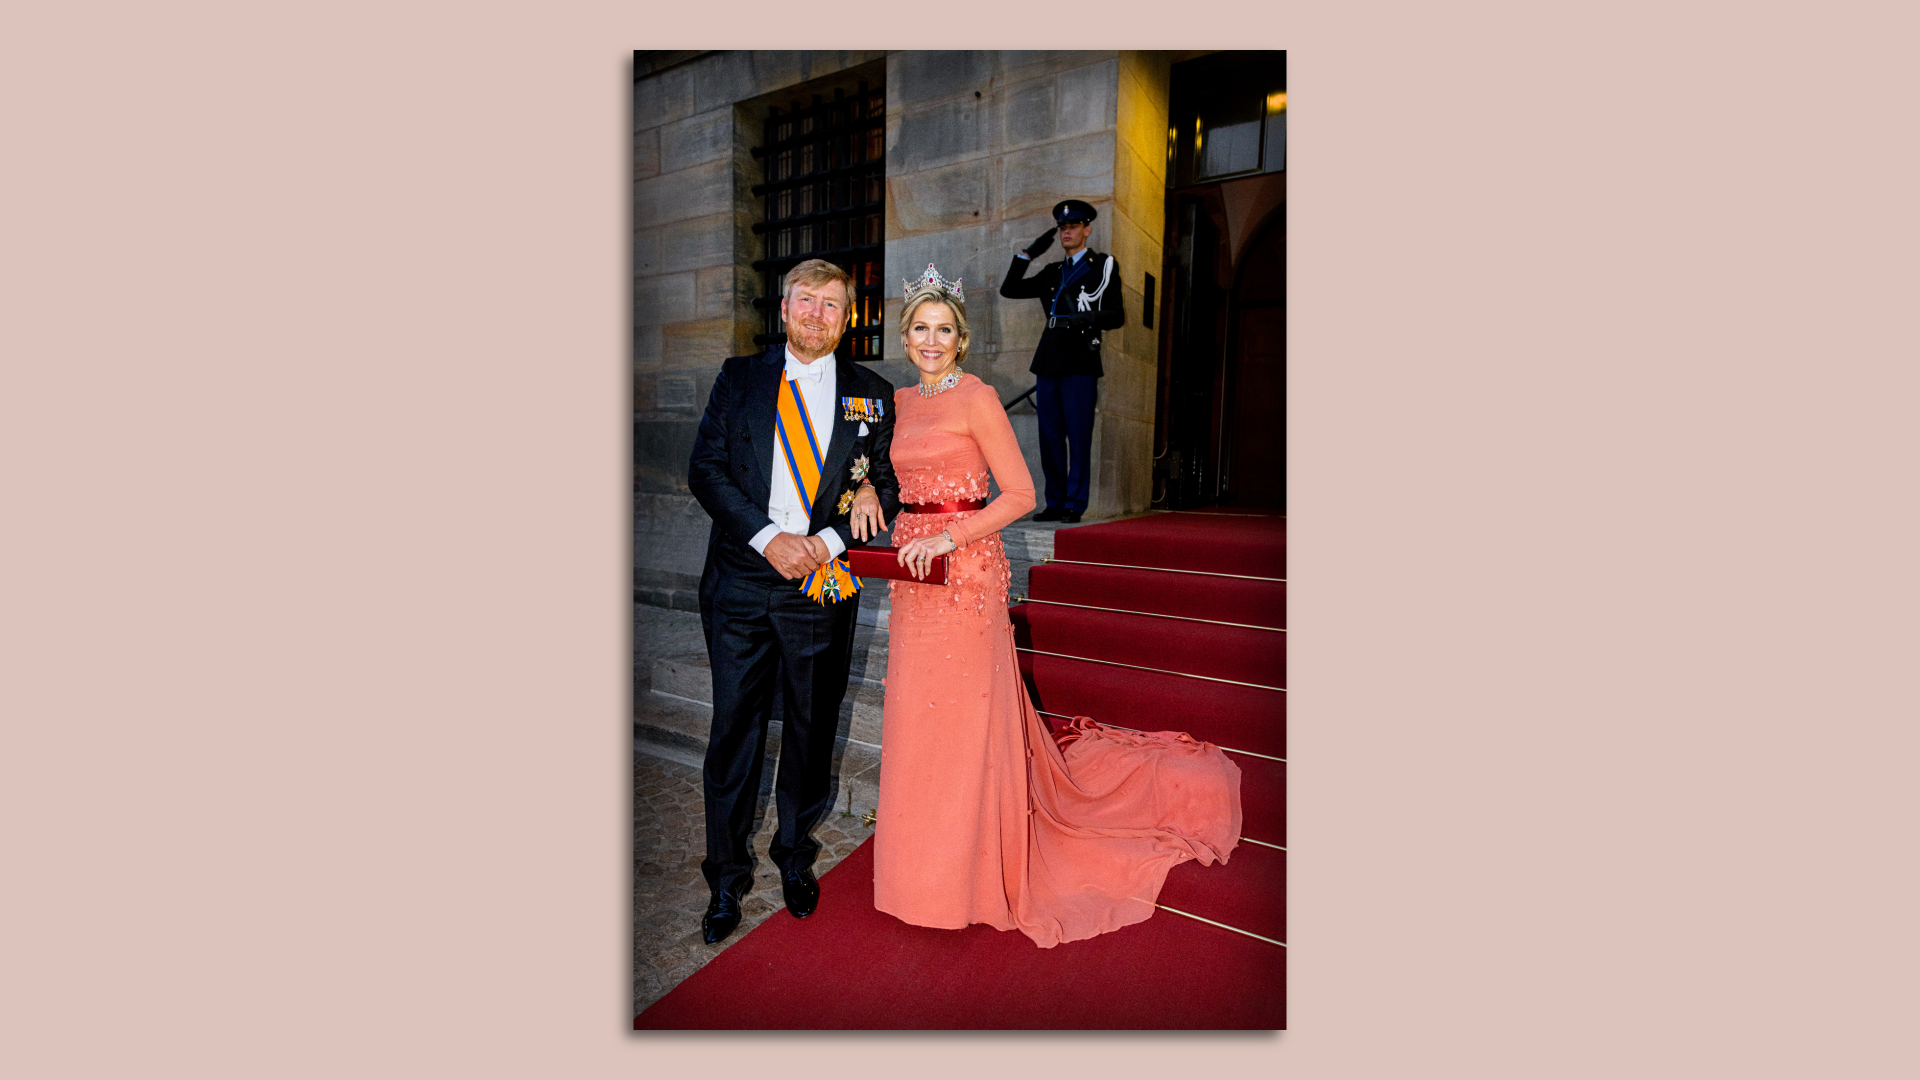 Photo of the Netherlands royal couple. 